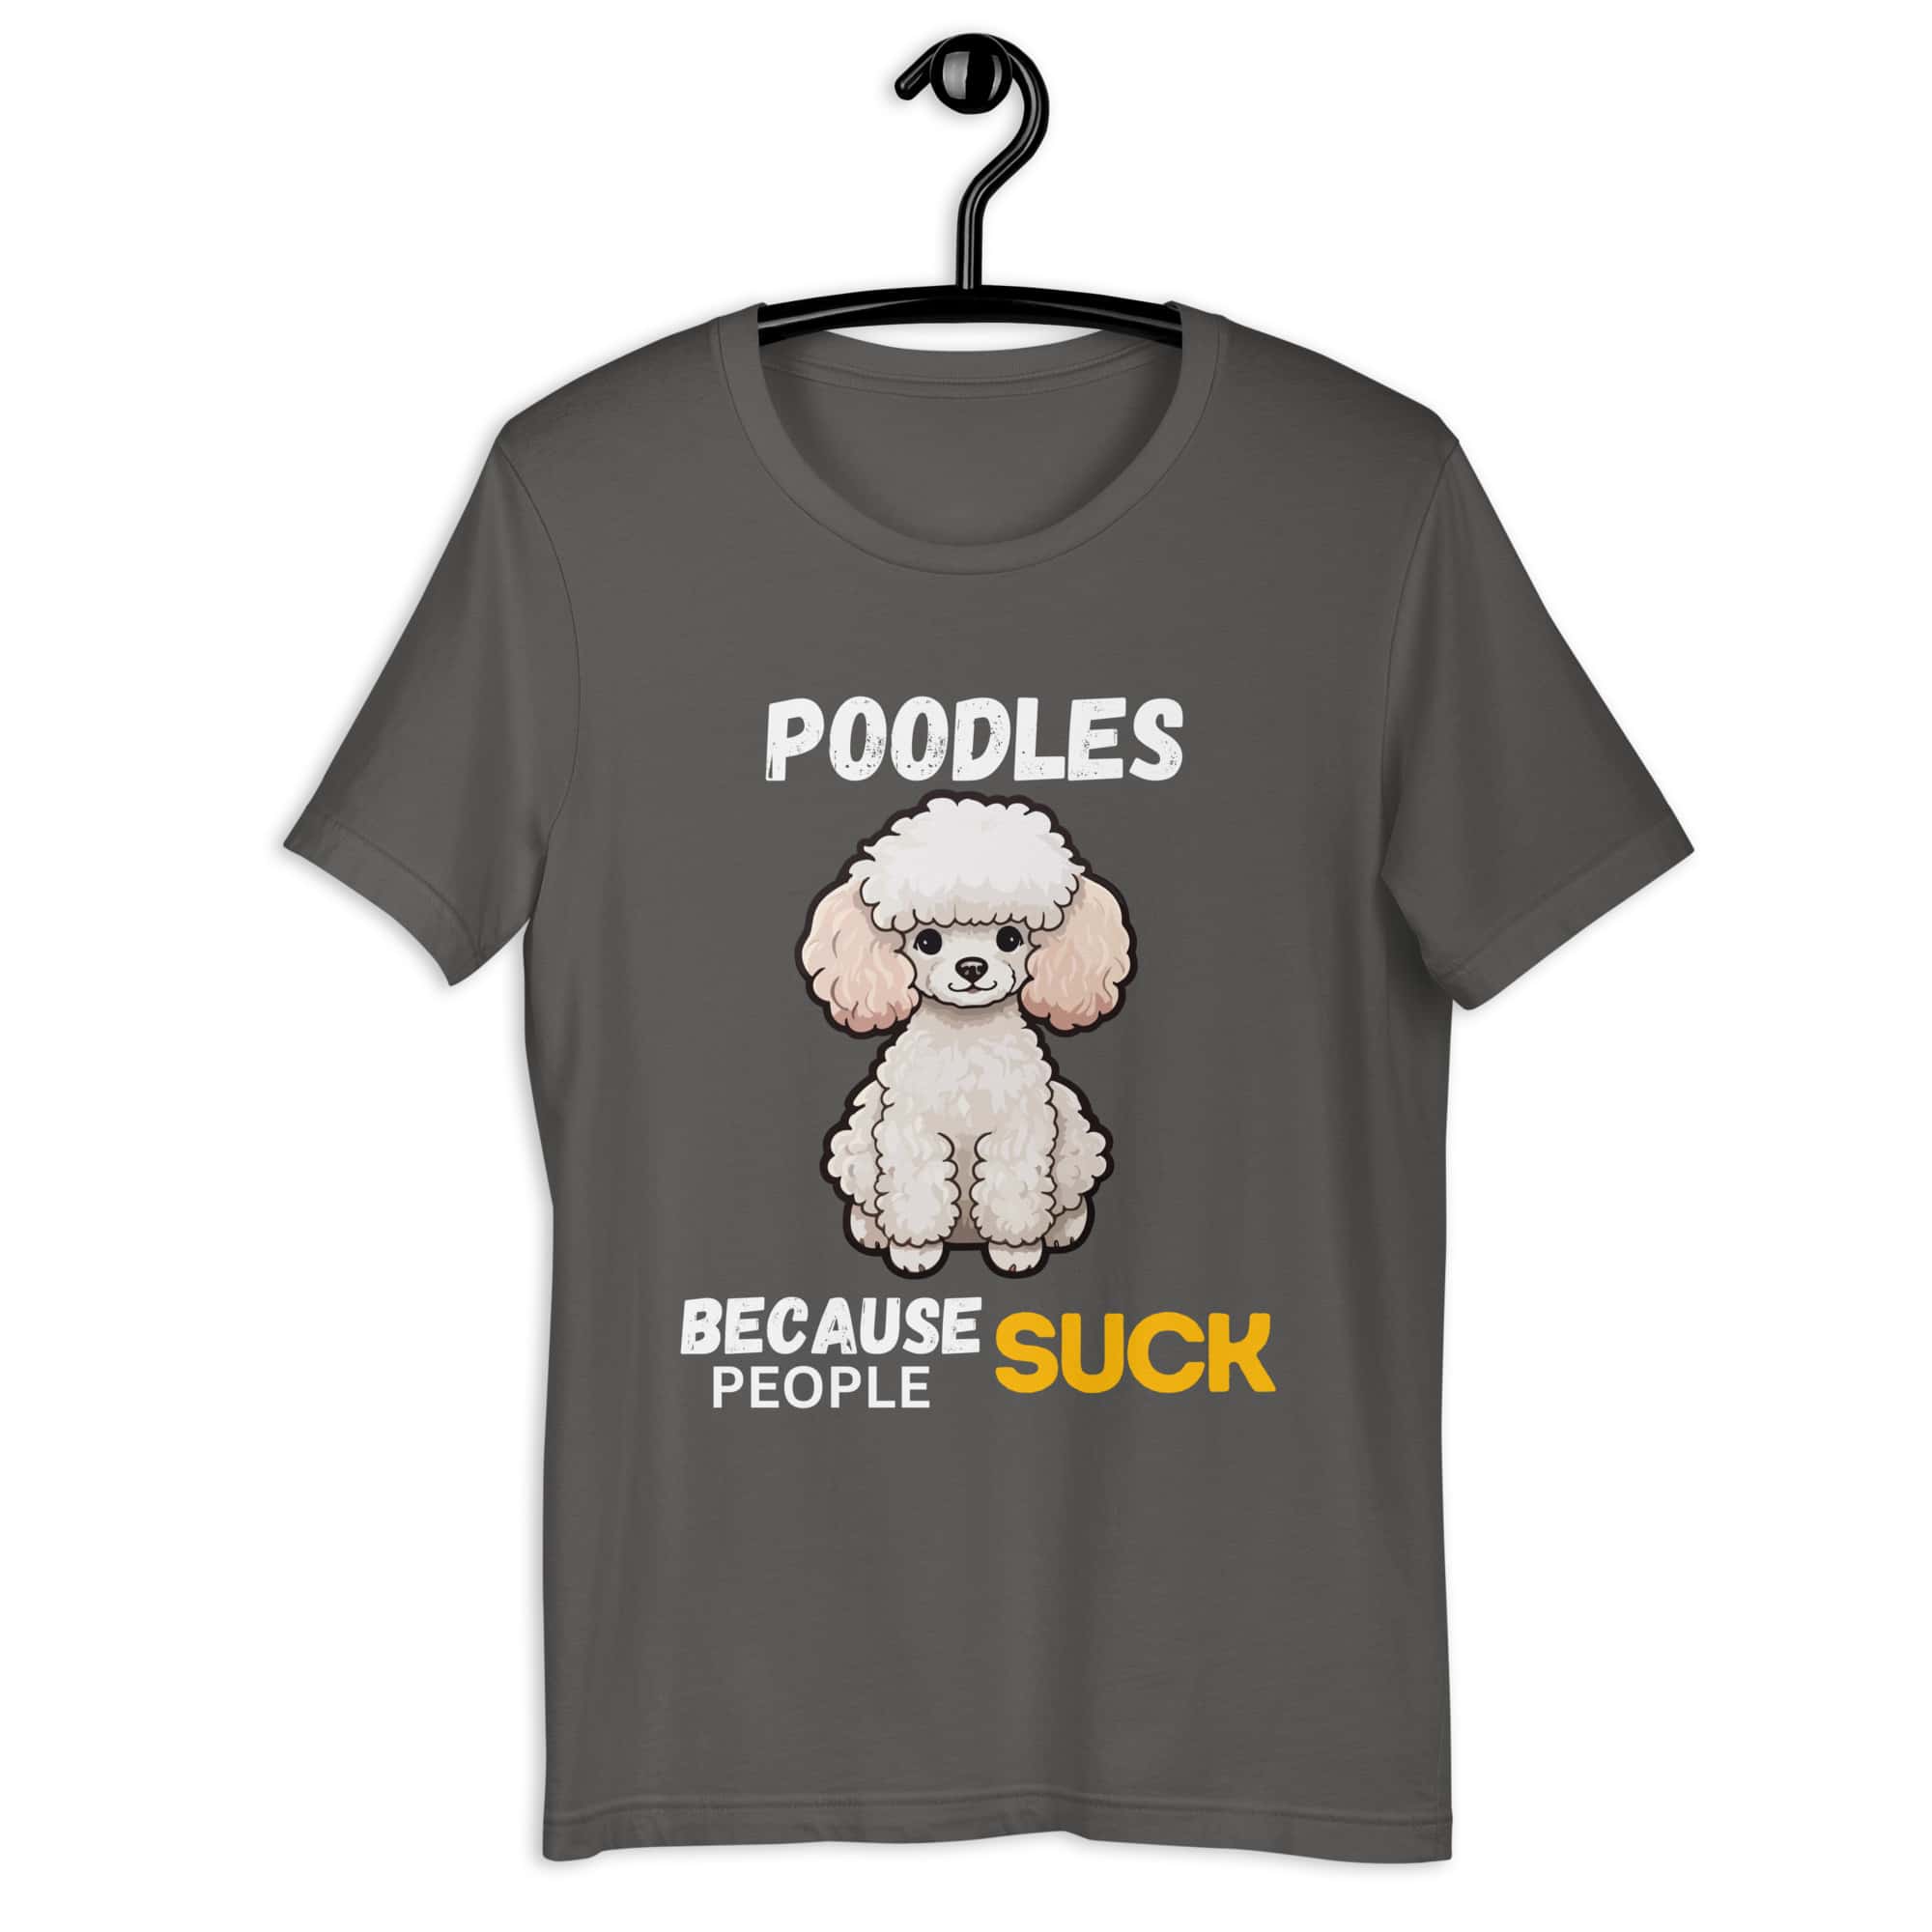 Poodles Because People Suck Unisex T-Shirt gray